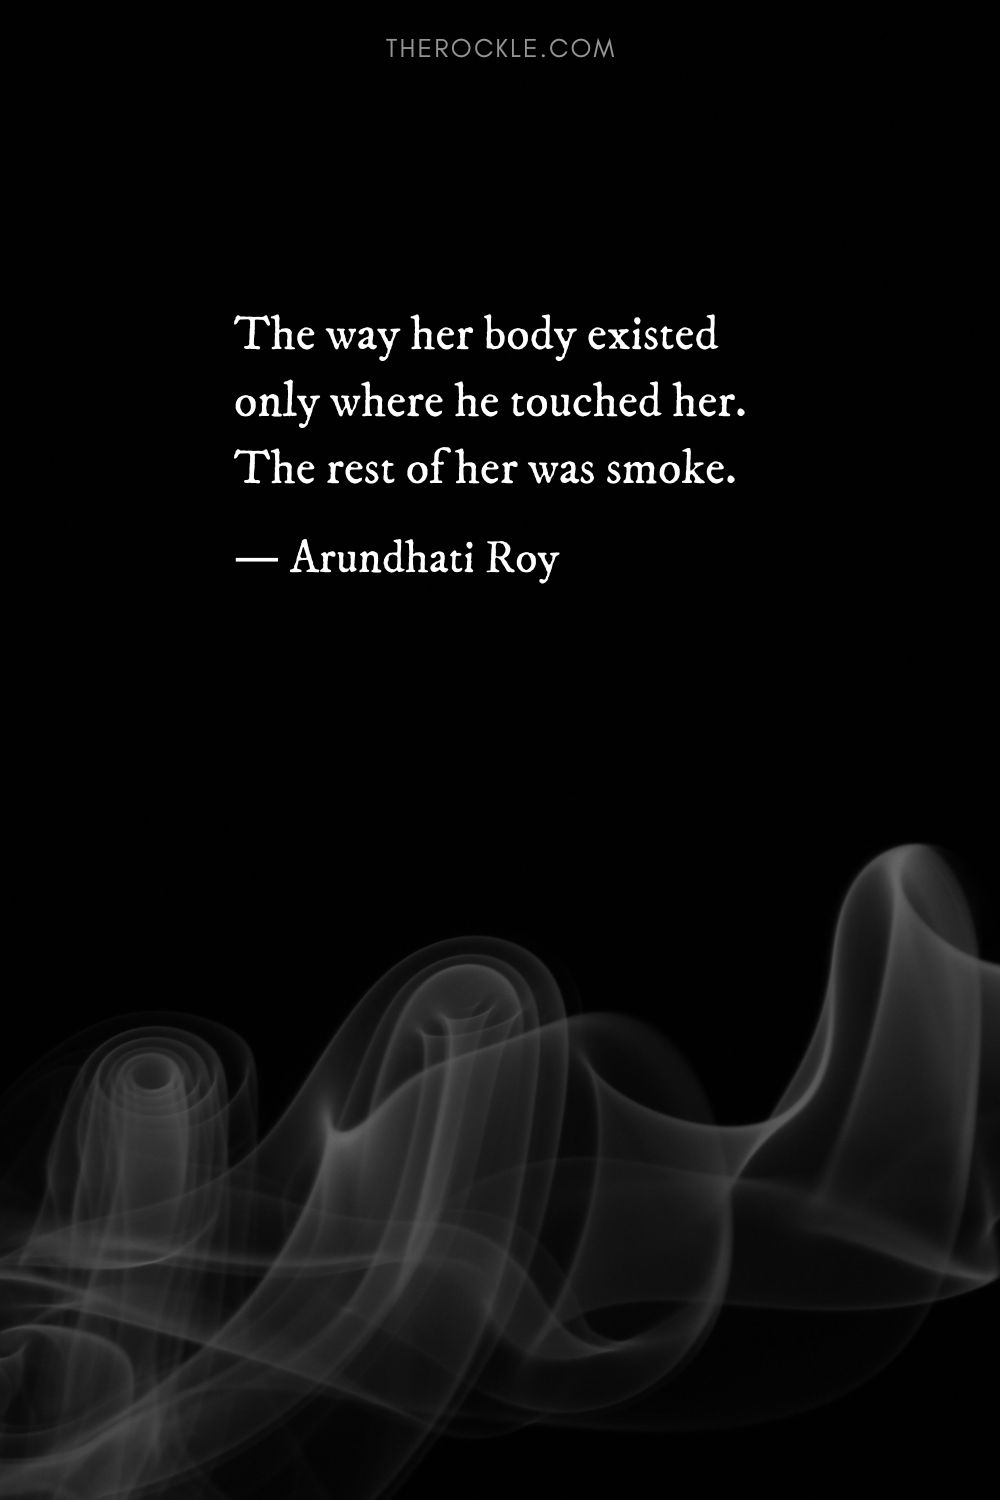 Arundhati Roy quote: “The way her body existed only where he touched her. The rest of her was smoke.”